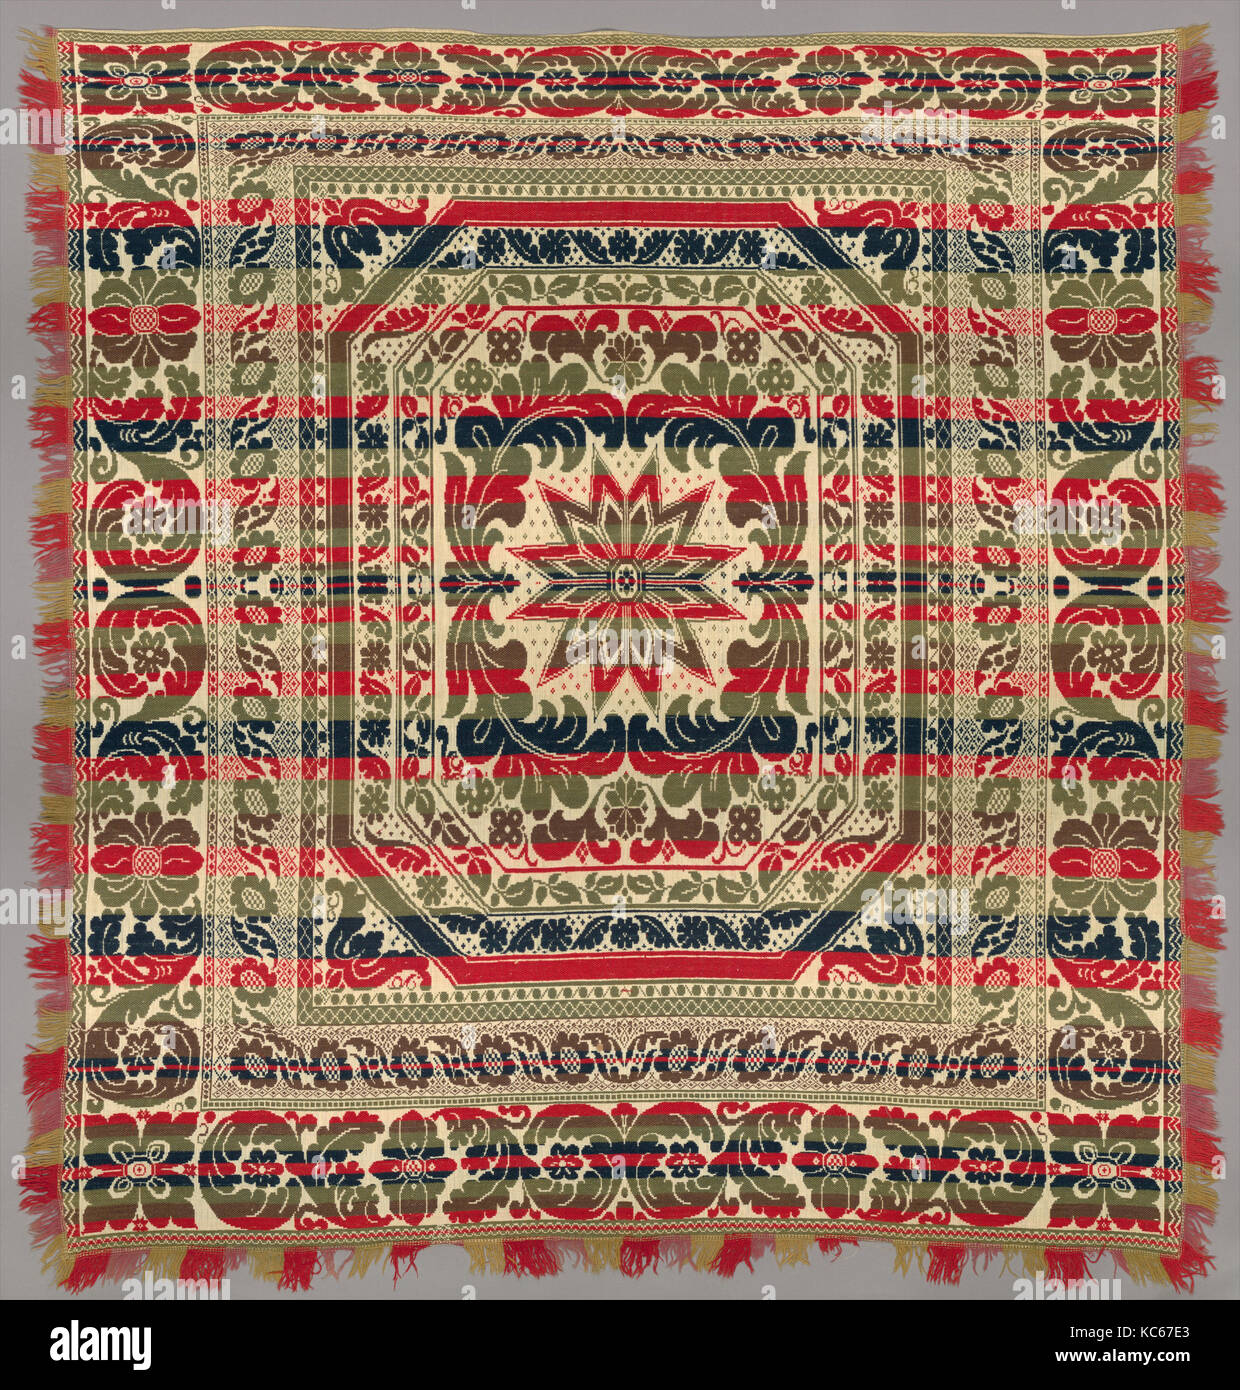 Coverlet, ca. 1850–70, Wool and cotton, Jacquard-loom-woven, 85 1/2 x 79 in. (217.2 x 200.7 cm), Textiles Stock Photo